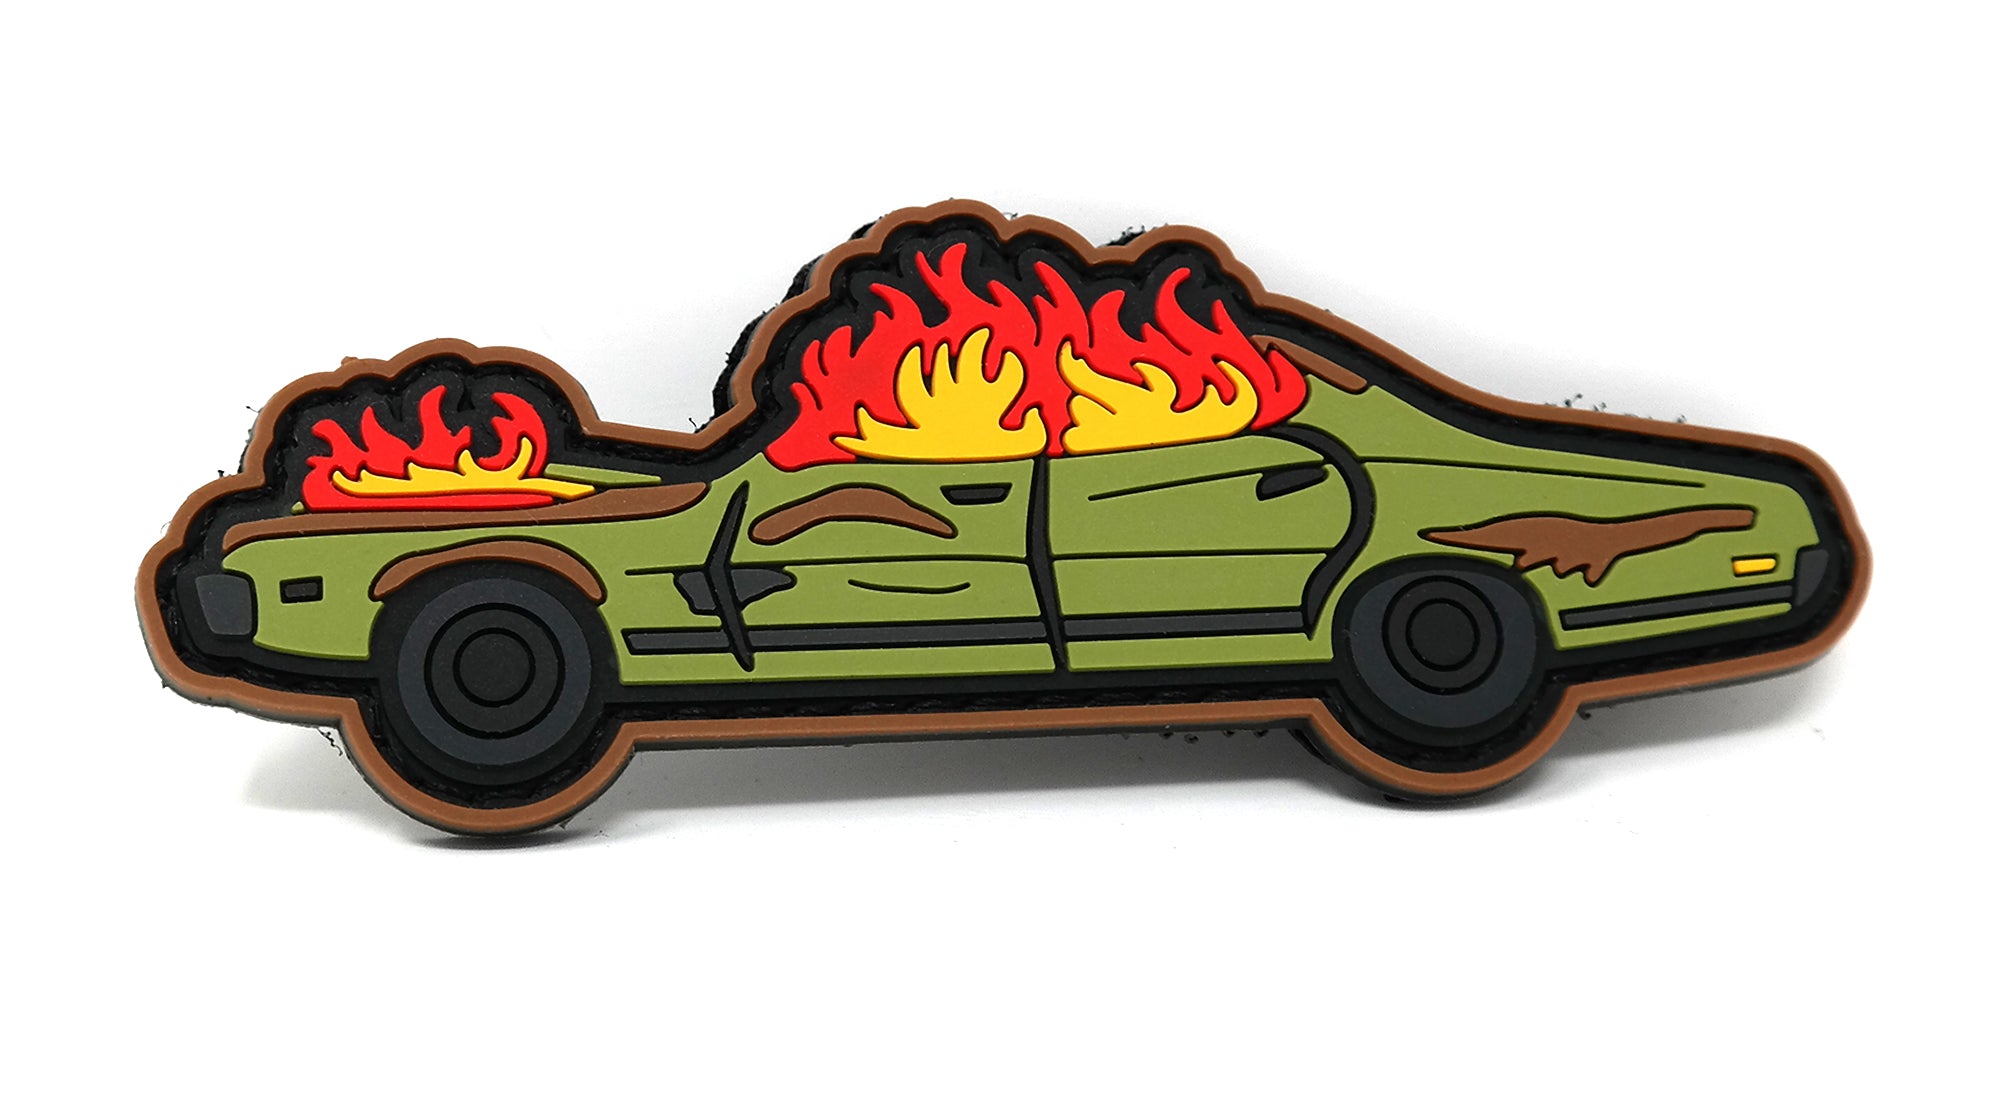 The Dude's Burning Car PVC Rubber Funny Tactical Hook and Loop